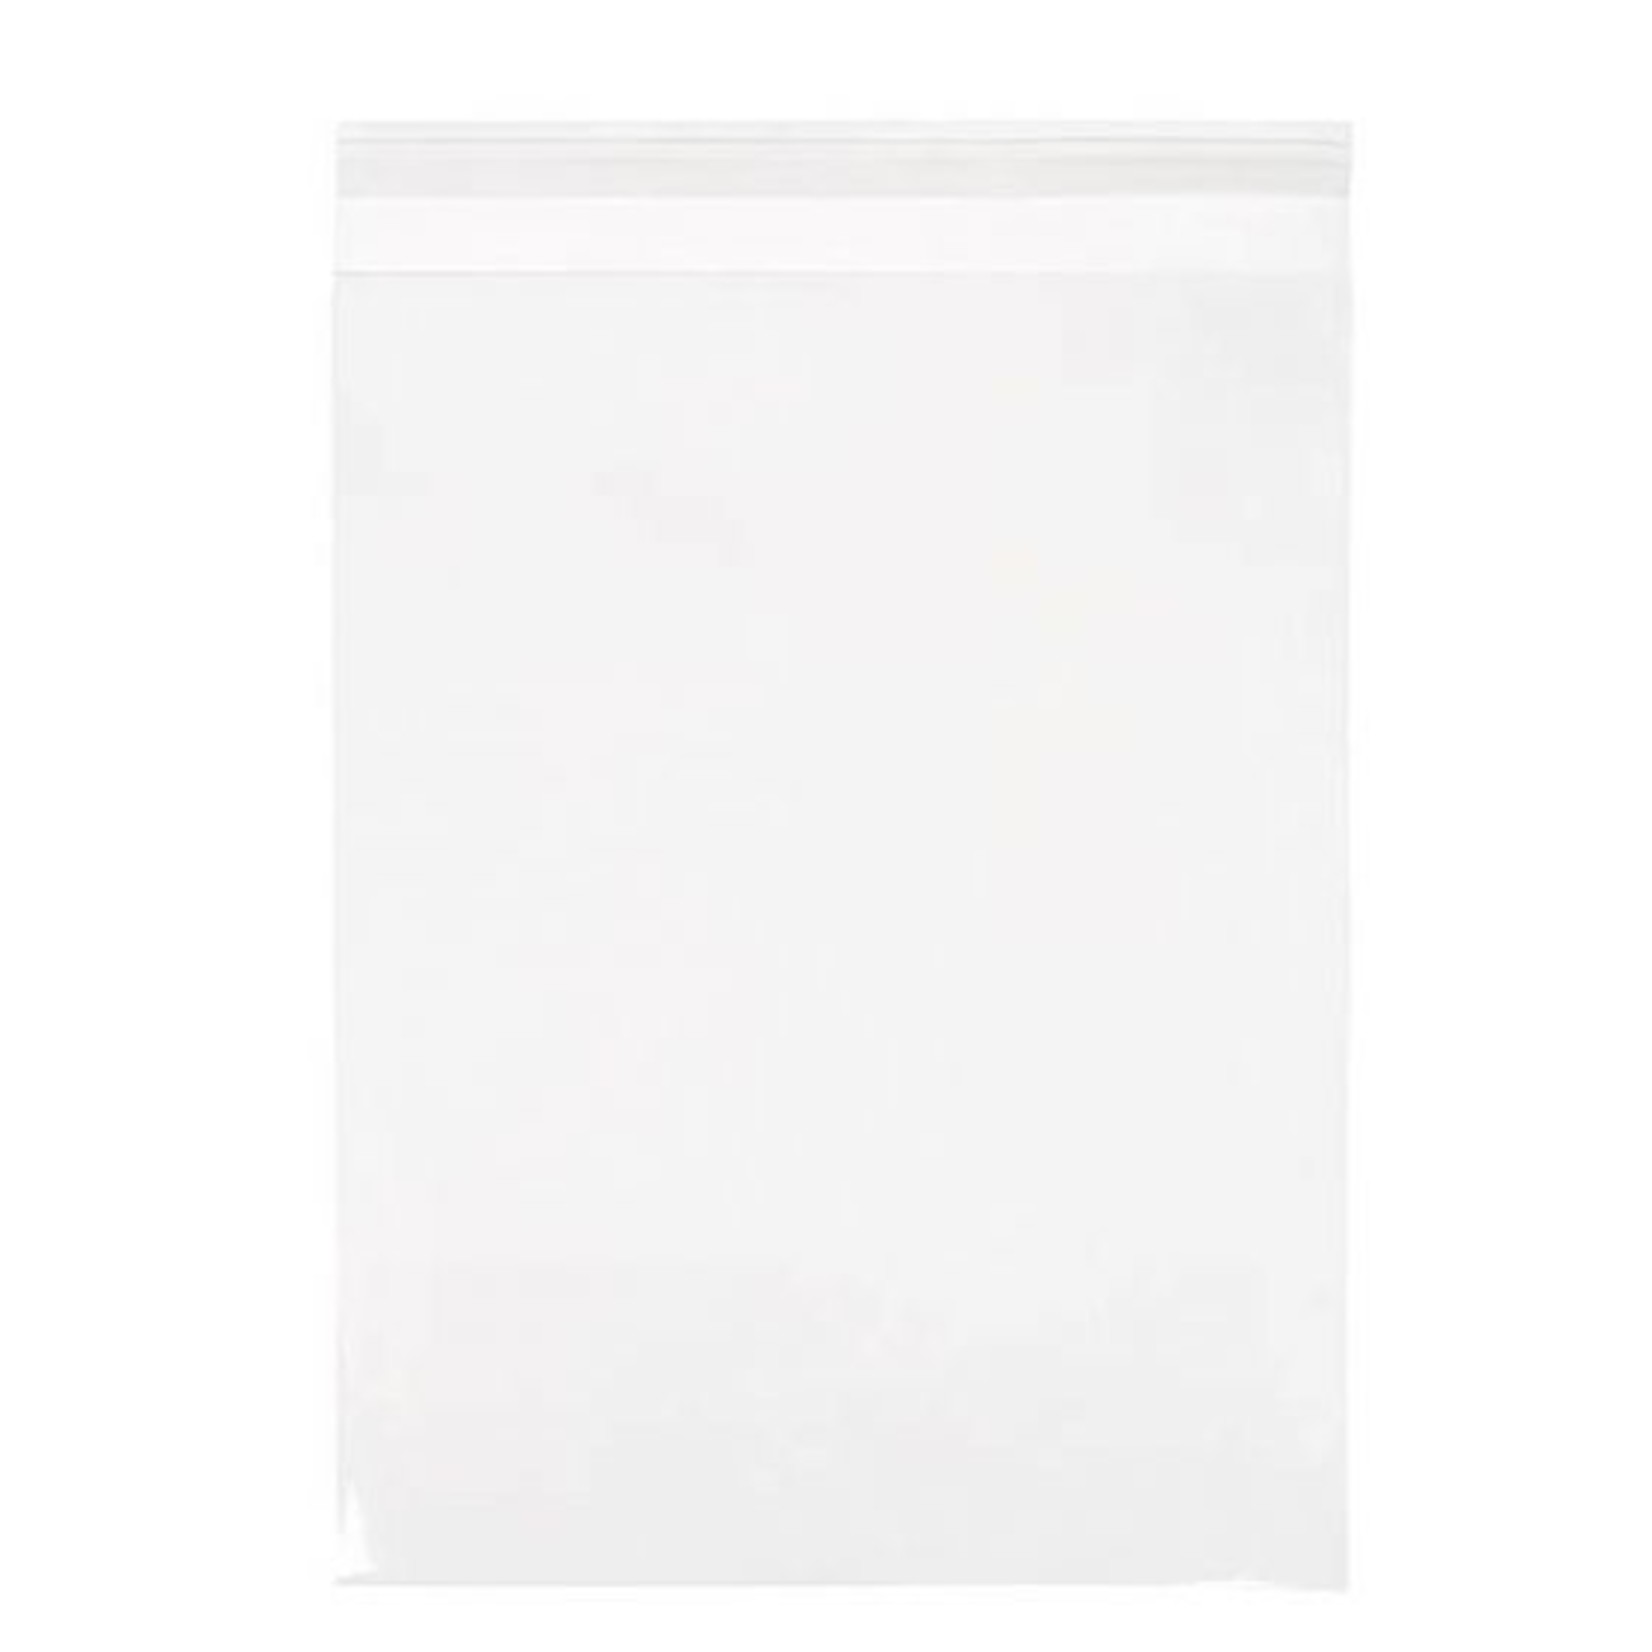 CLEARBAGS CLEAR BAG 9X12 EA